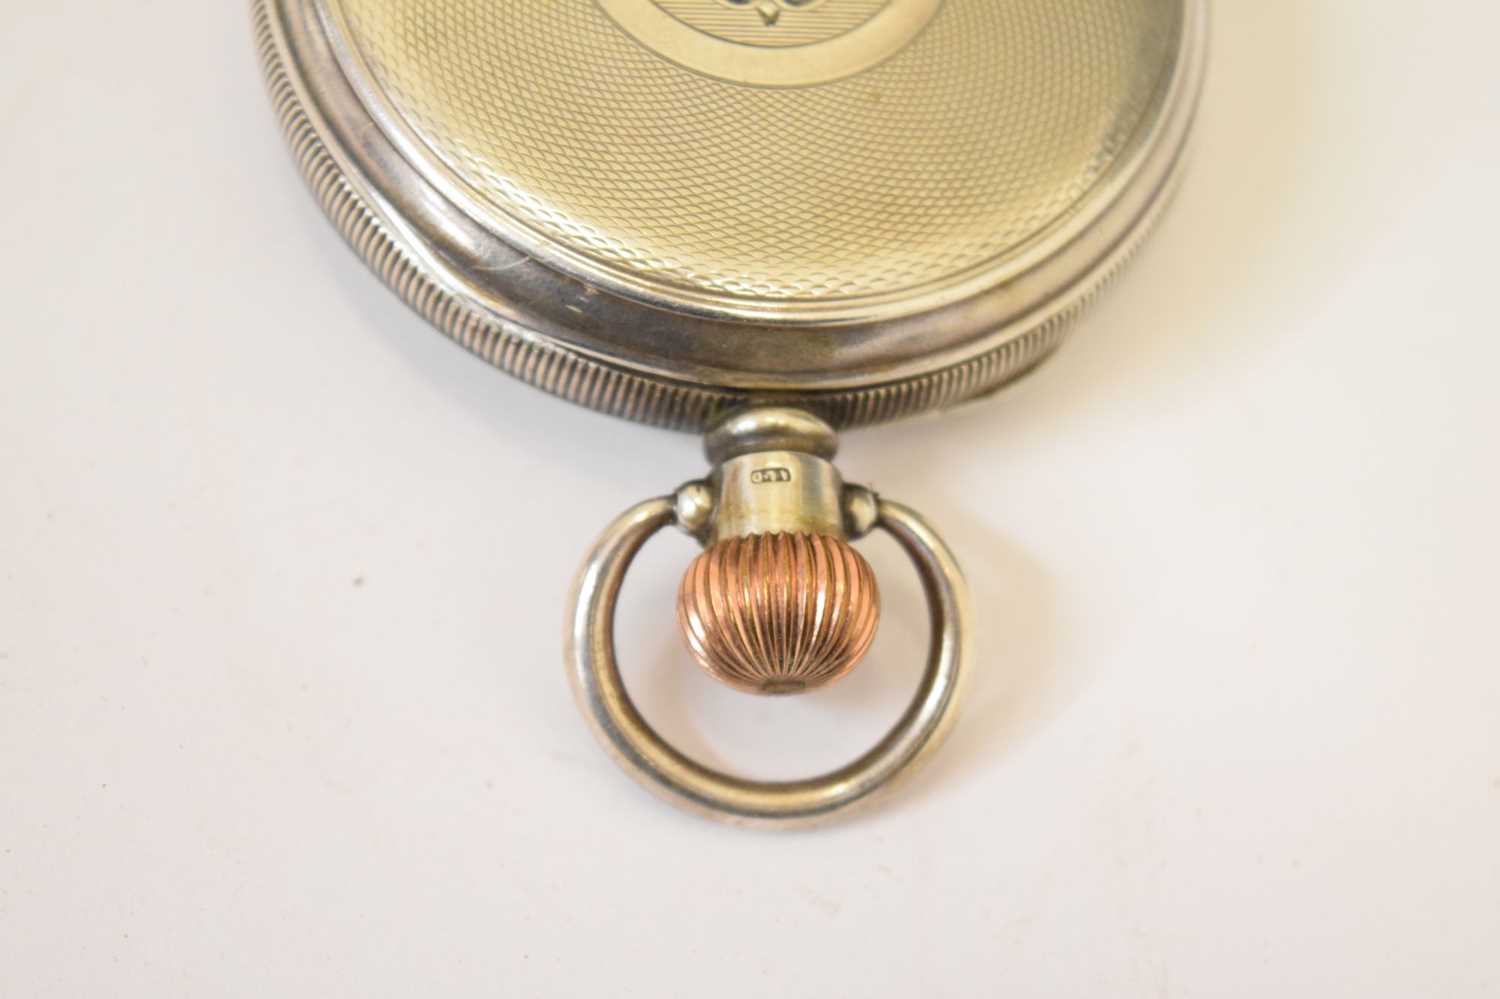 American Waltham Watch Co. - Top wind silver cased pocket watch - Image 12 of 15